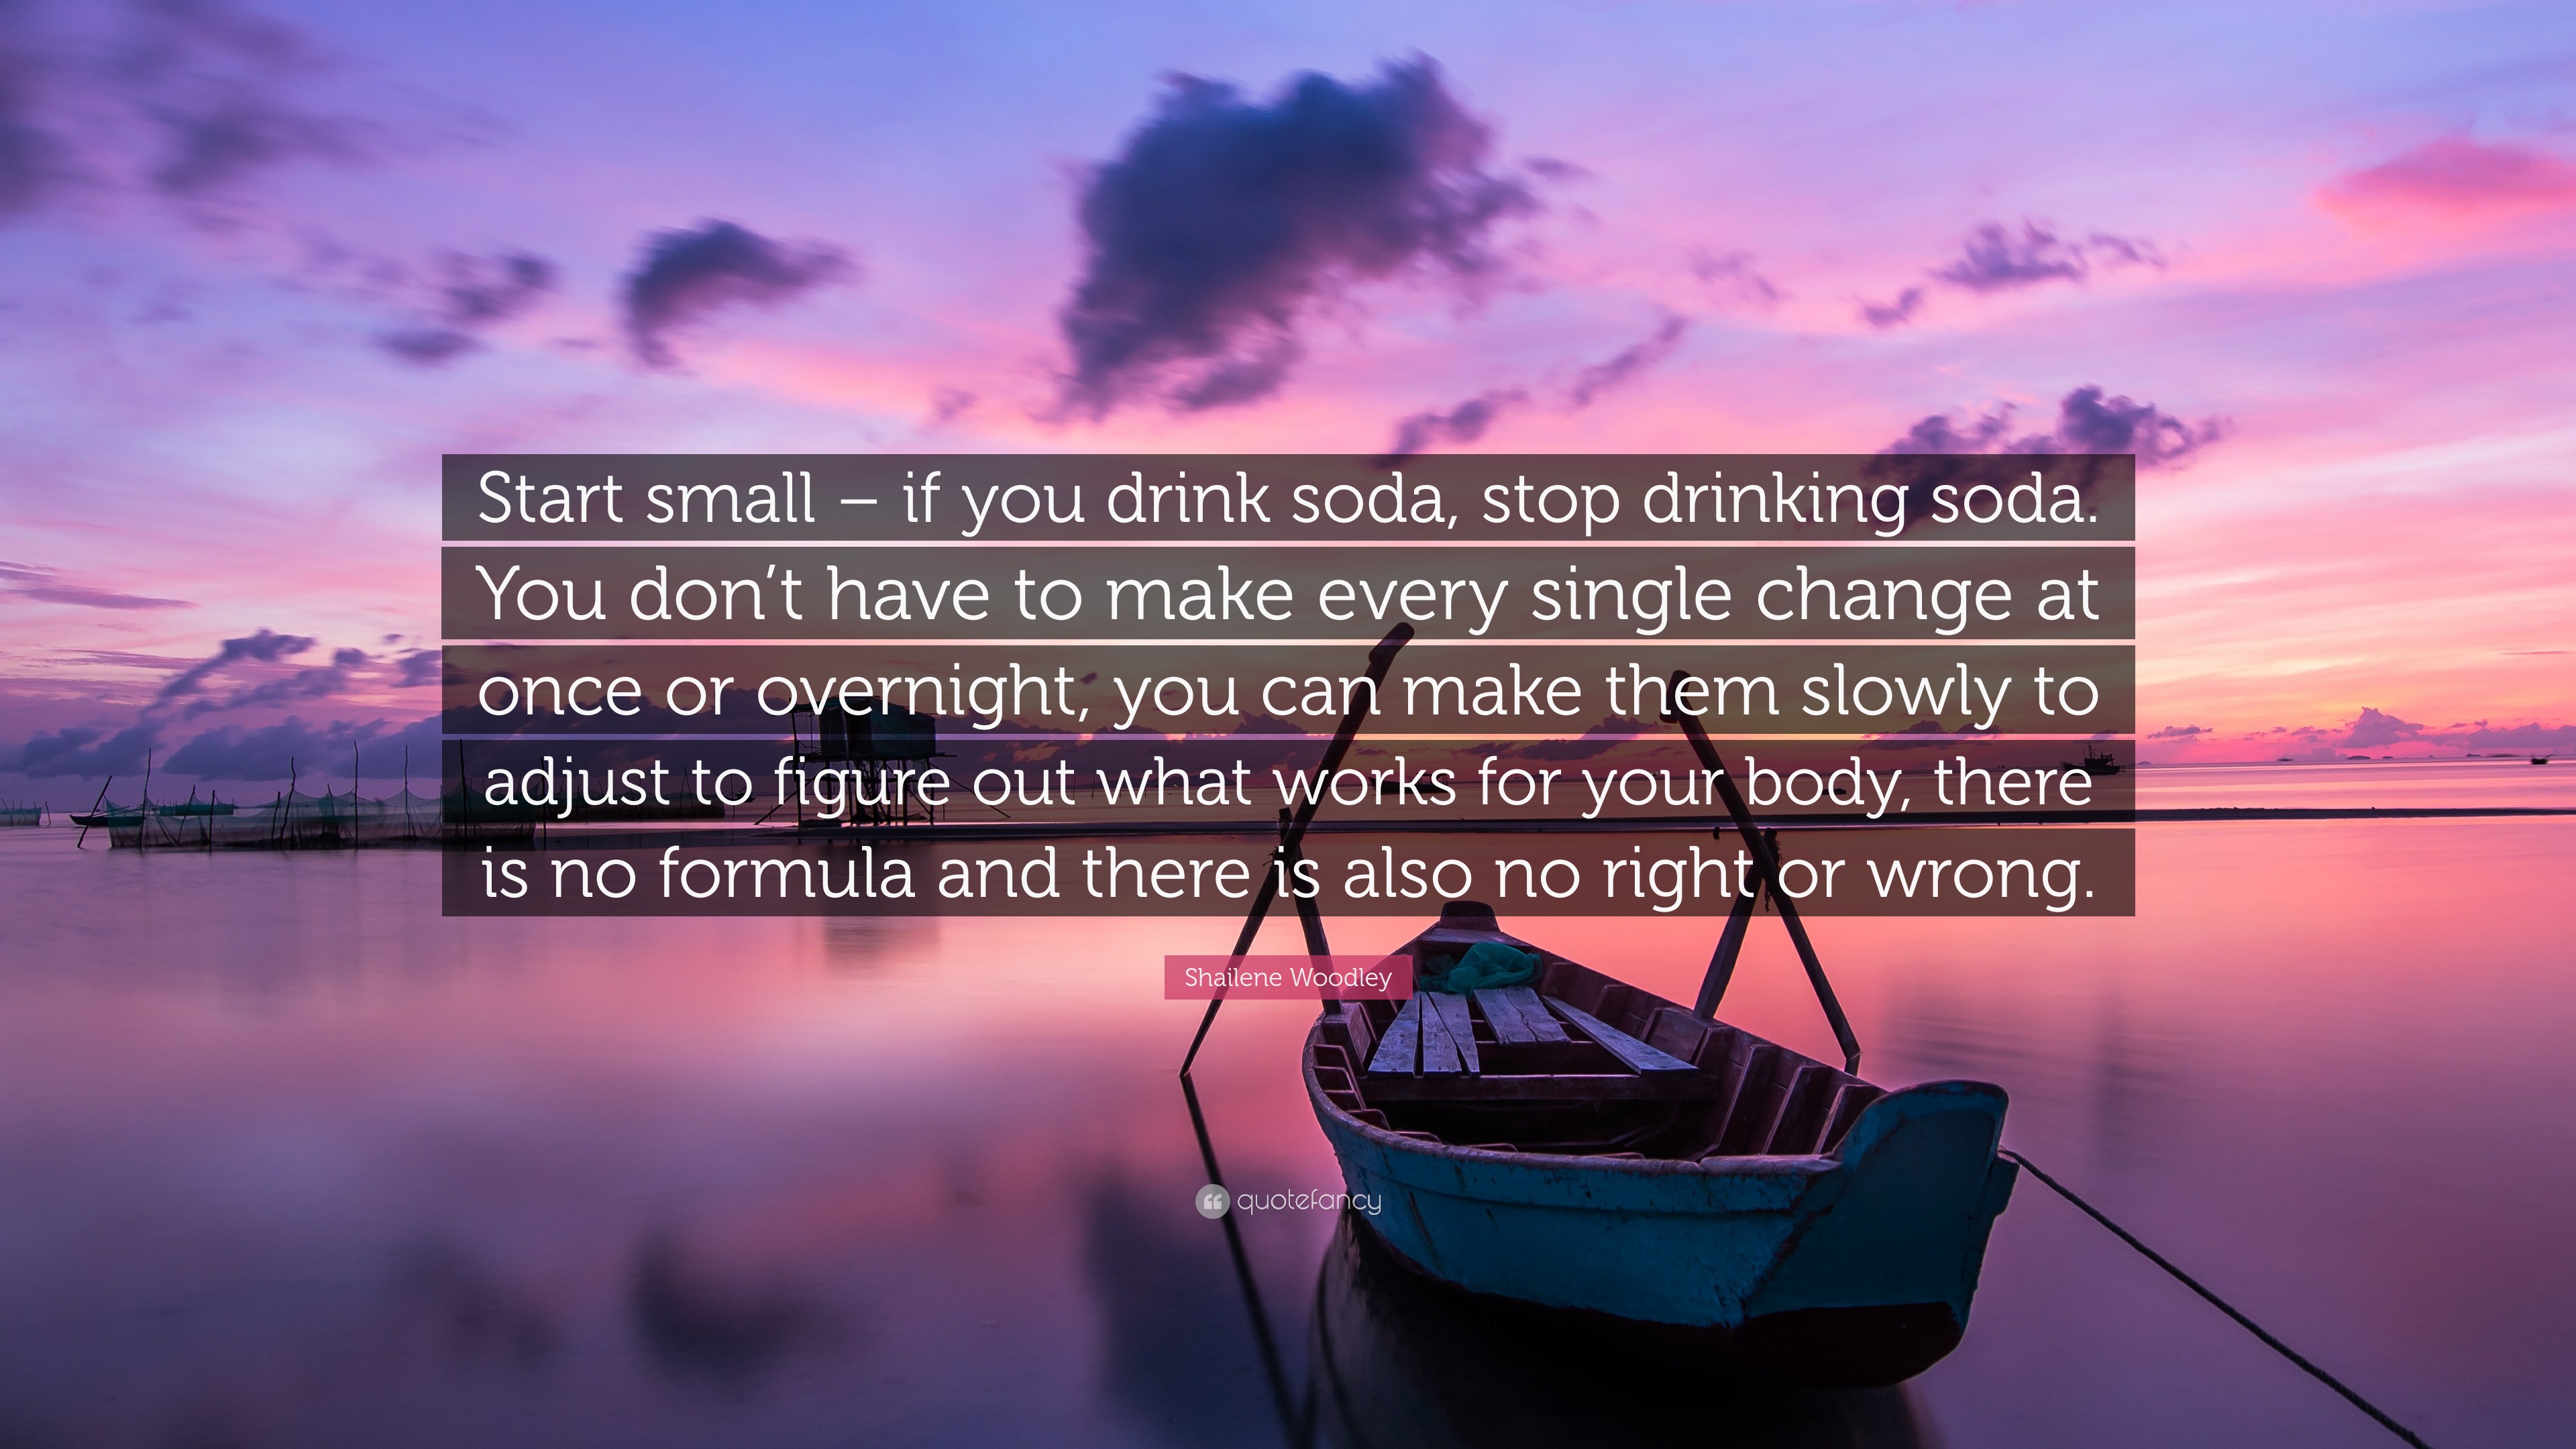 Shailene Woodley Quote: "Start small - if you drink soda, stop drinking soda. You don't have to ...